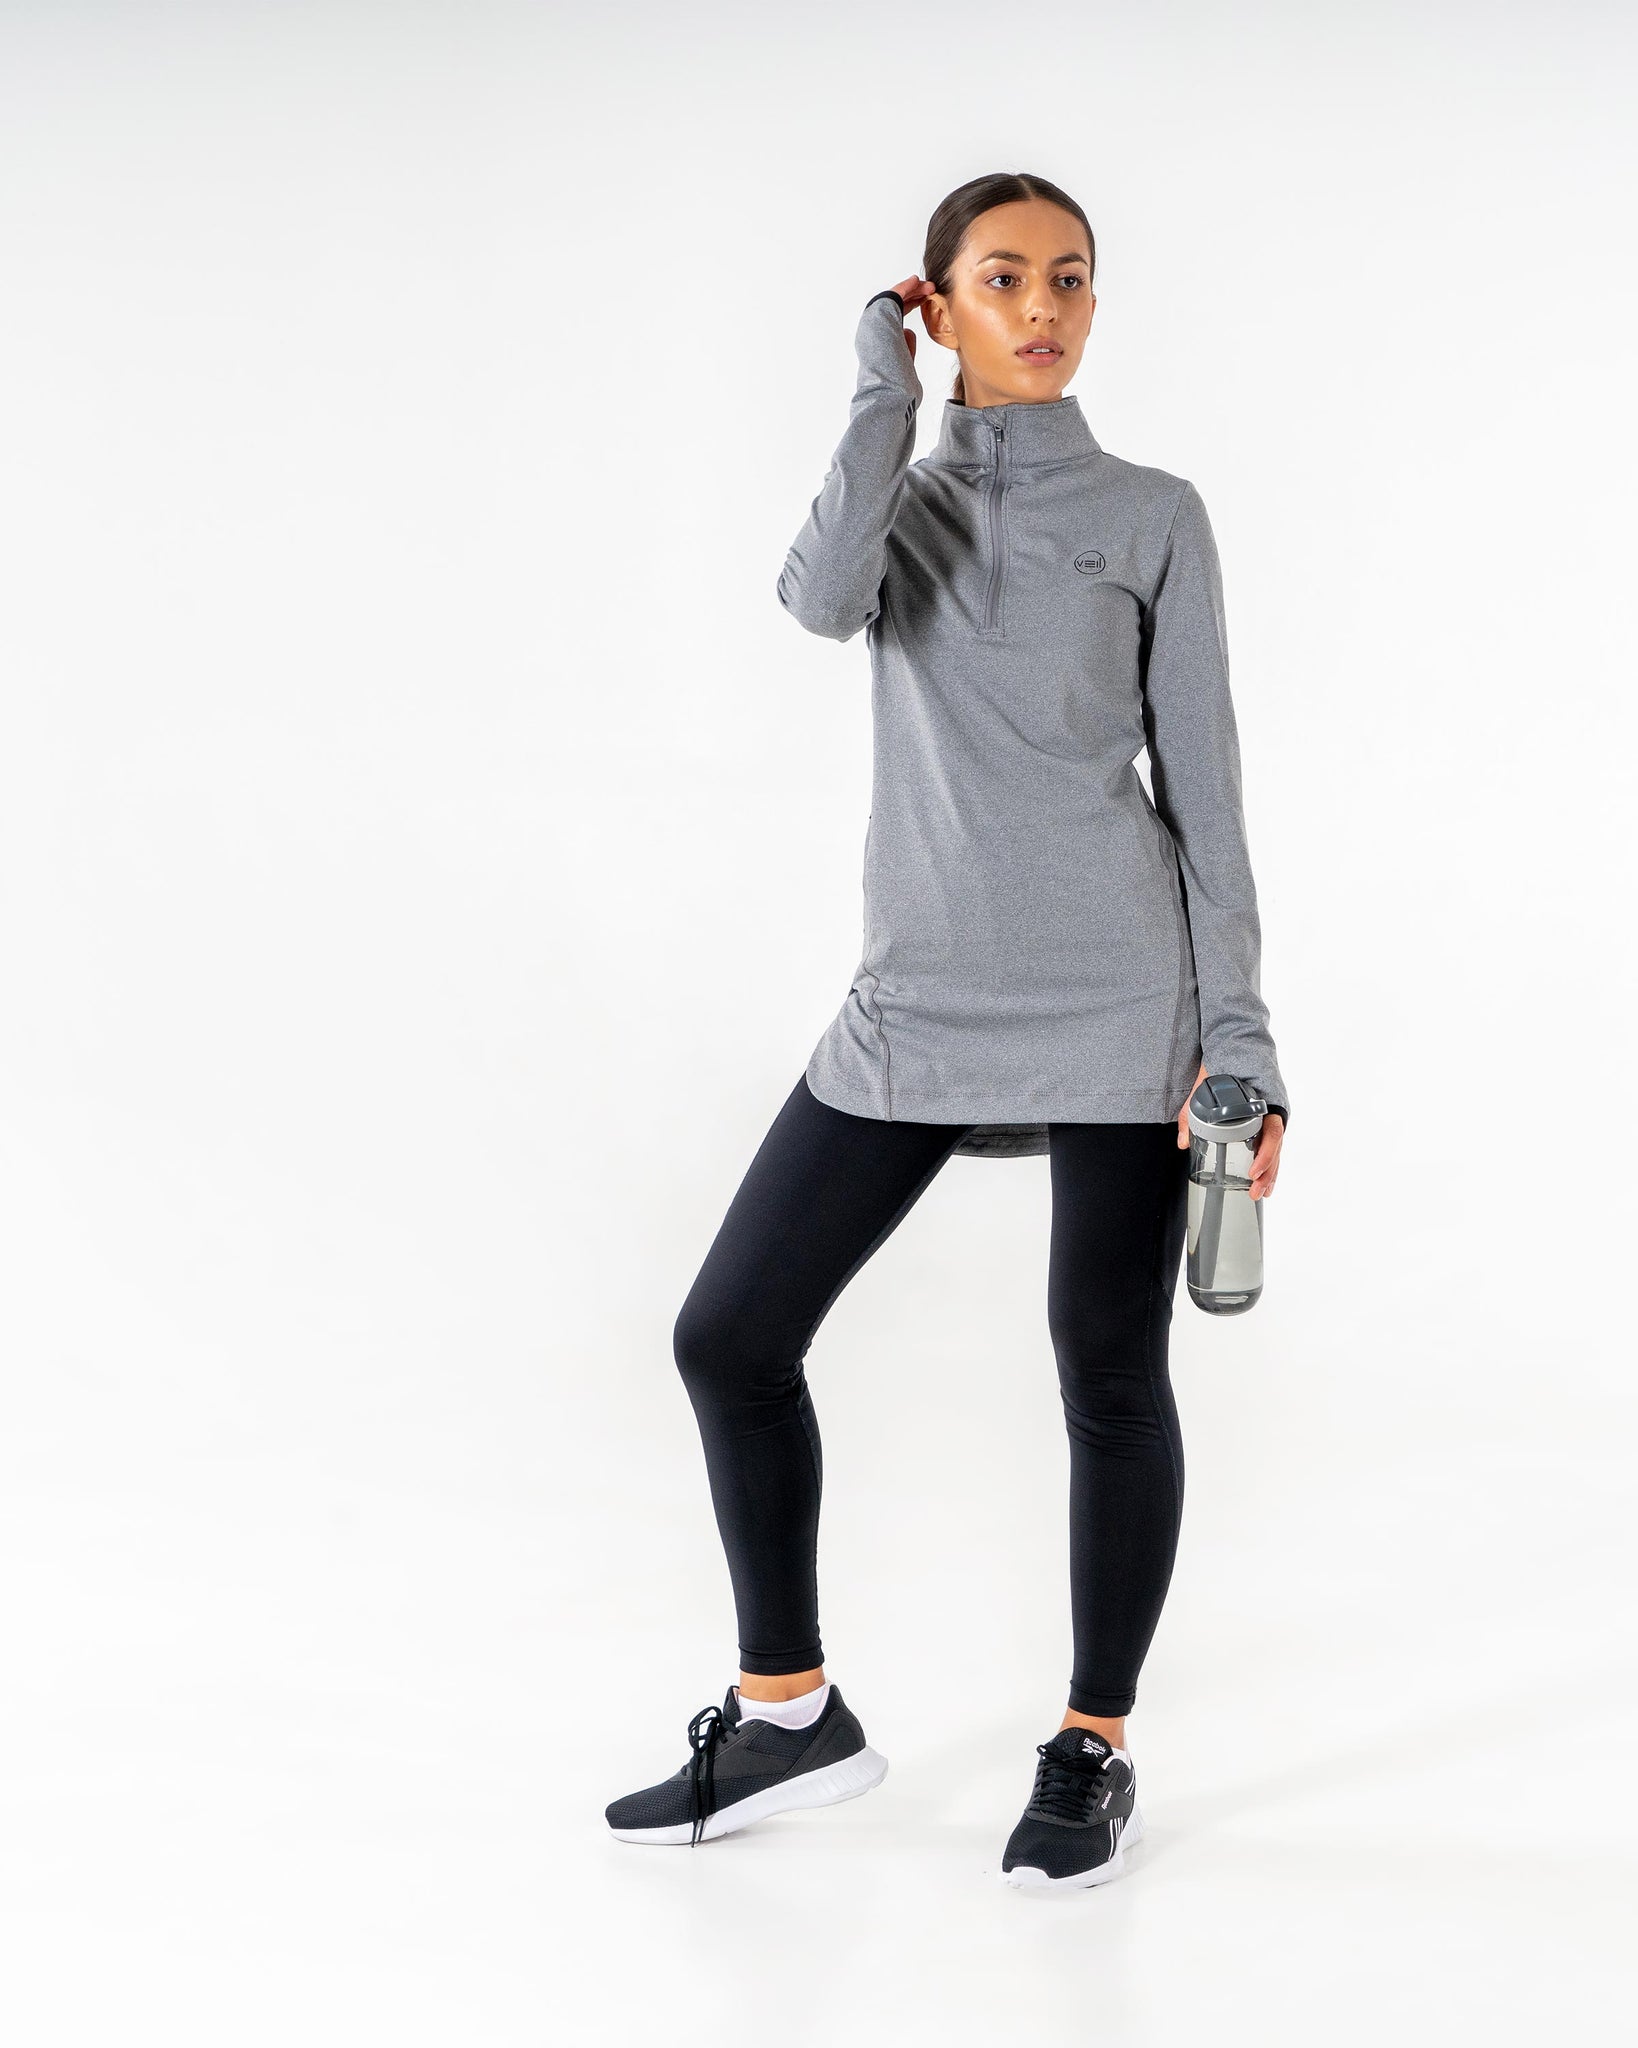 Spark Half-Zip in charcoal grey by Veil Garments. Modest activewear collection.